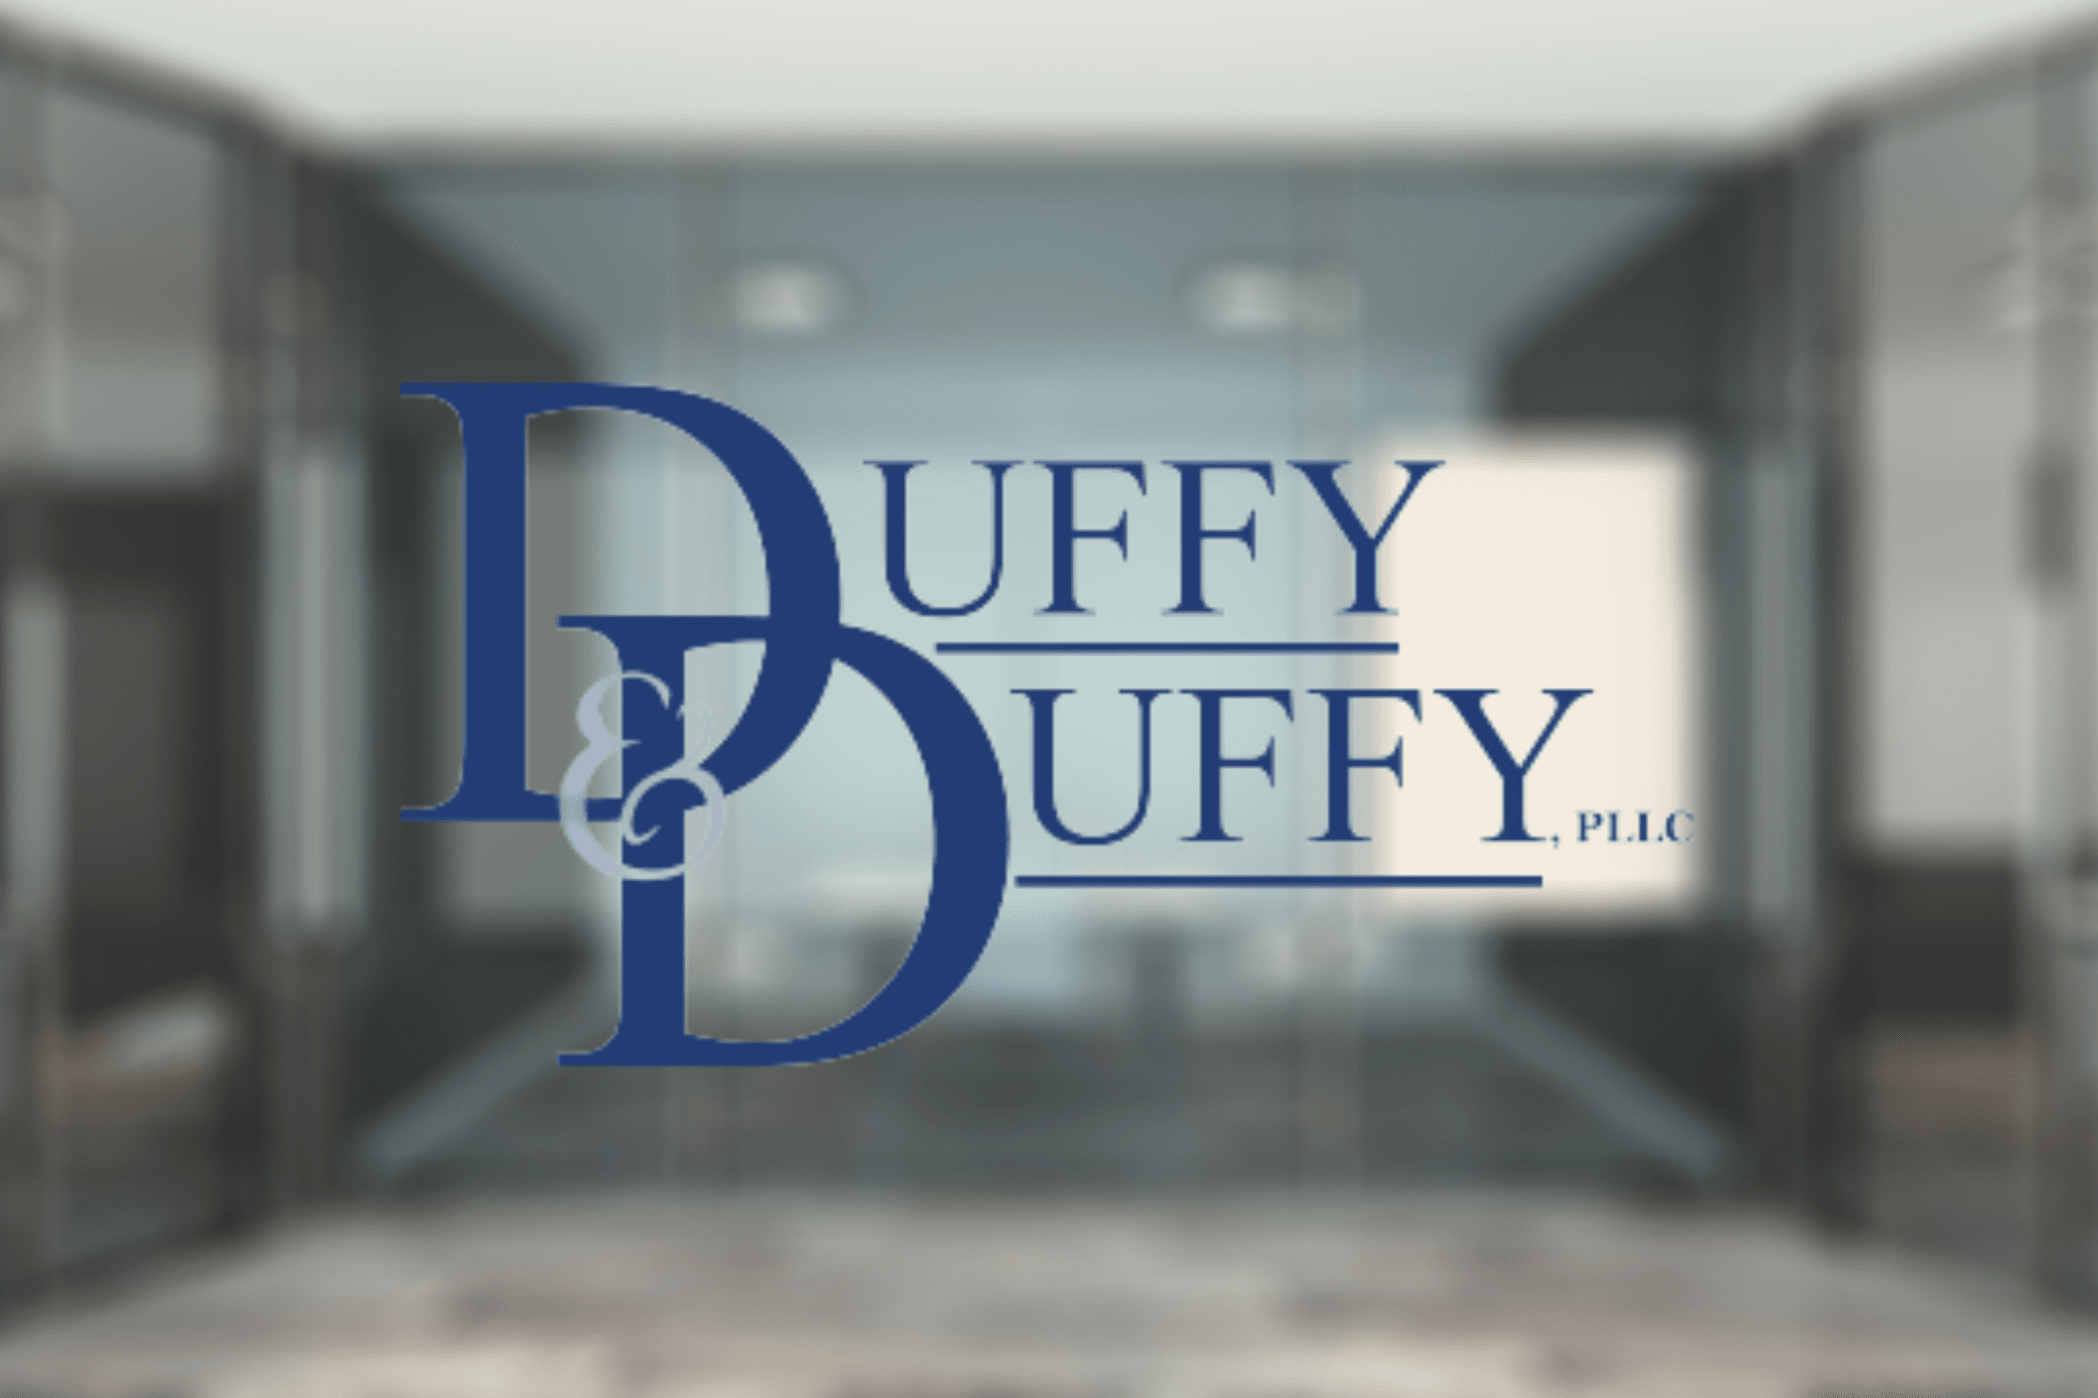 Duffy & Duffy: Contingency Fee Law Firm’s Growth and Success